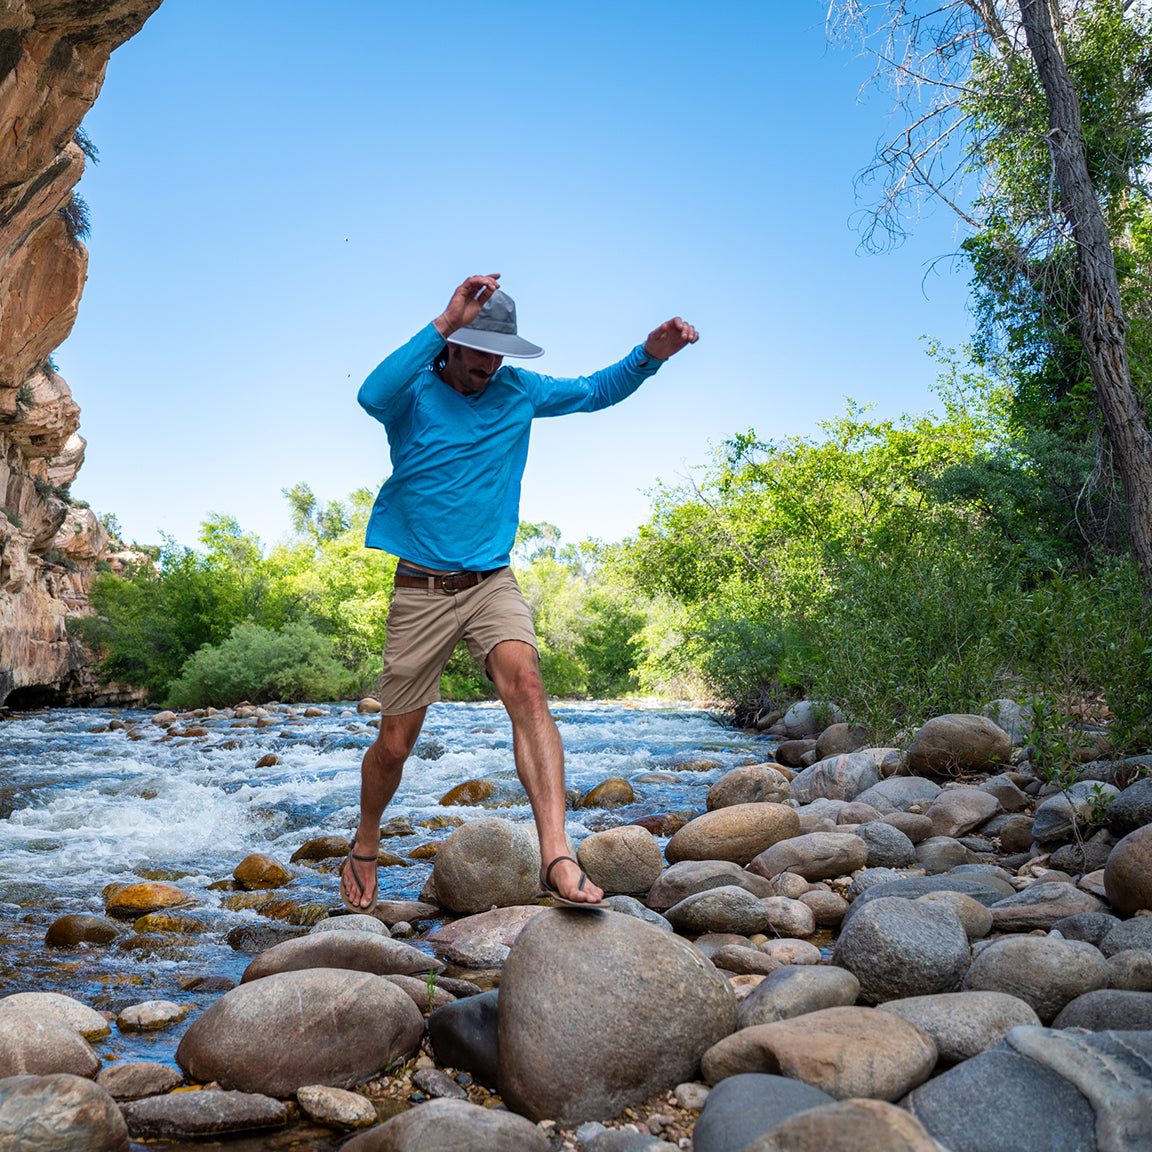 Man stepping over river rocks while wearing Tahoe sun hat by Carkella